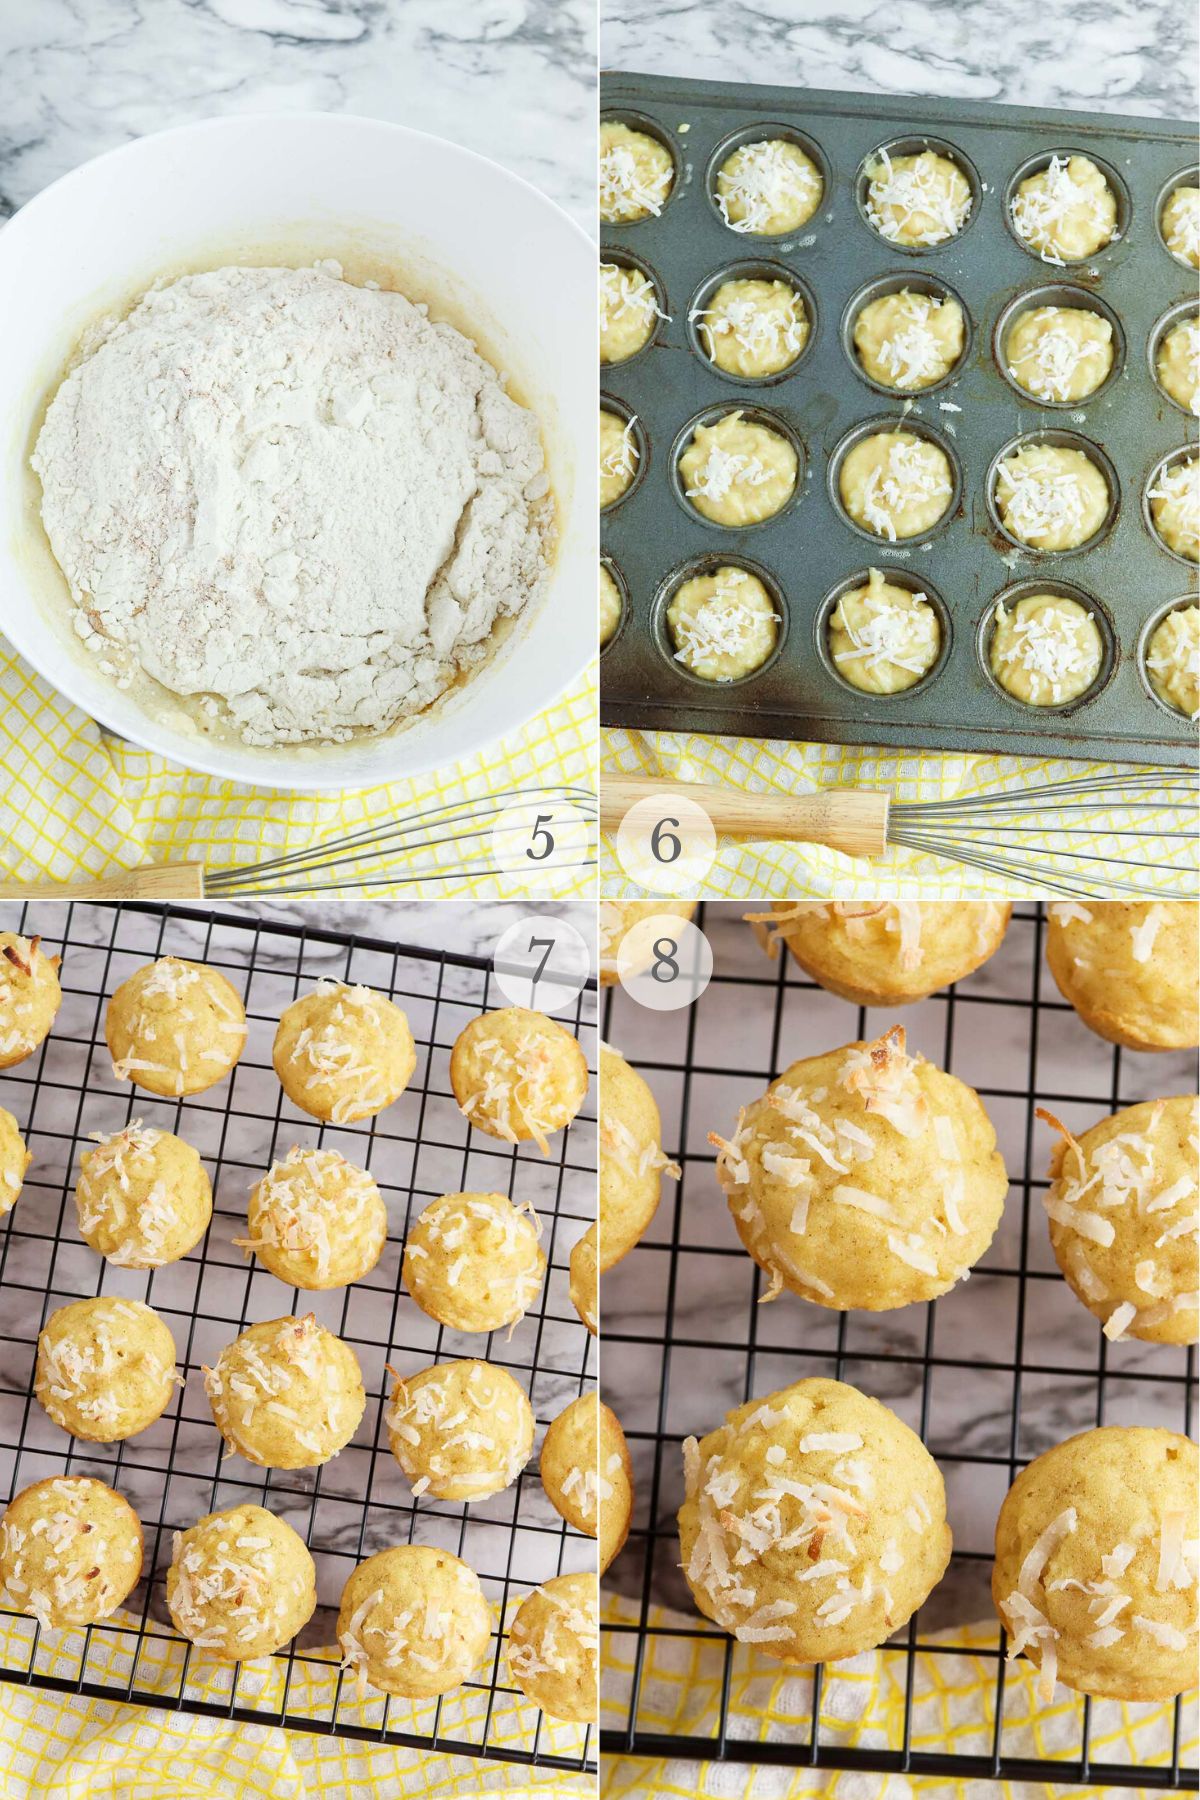 pineapple coconut muffins recipe steps 5-8.